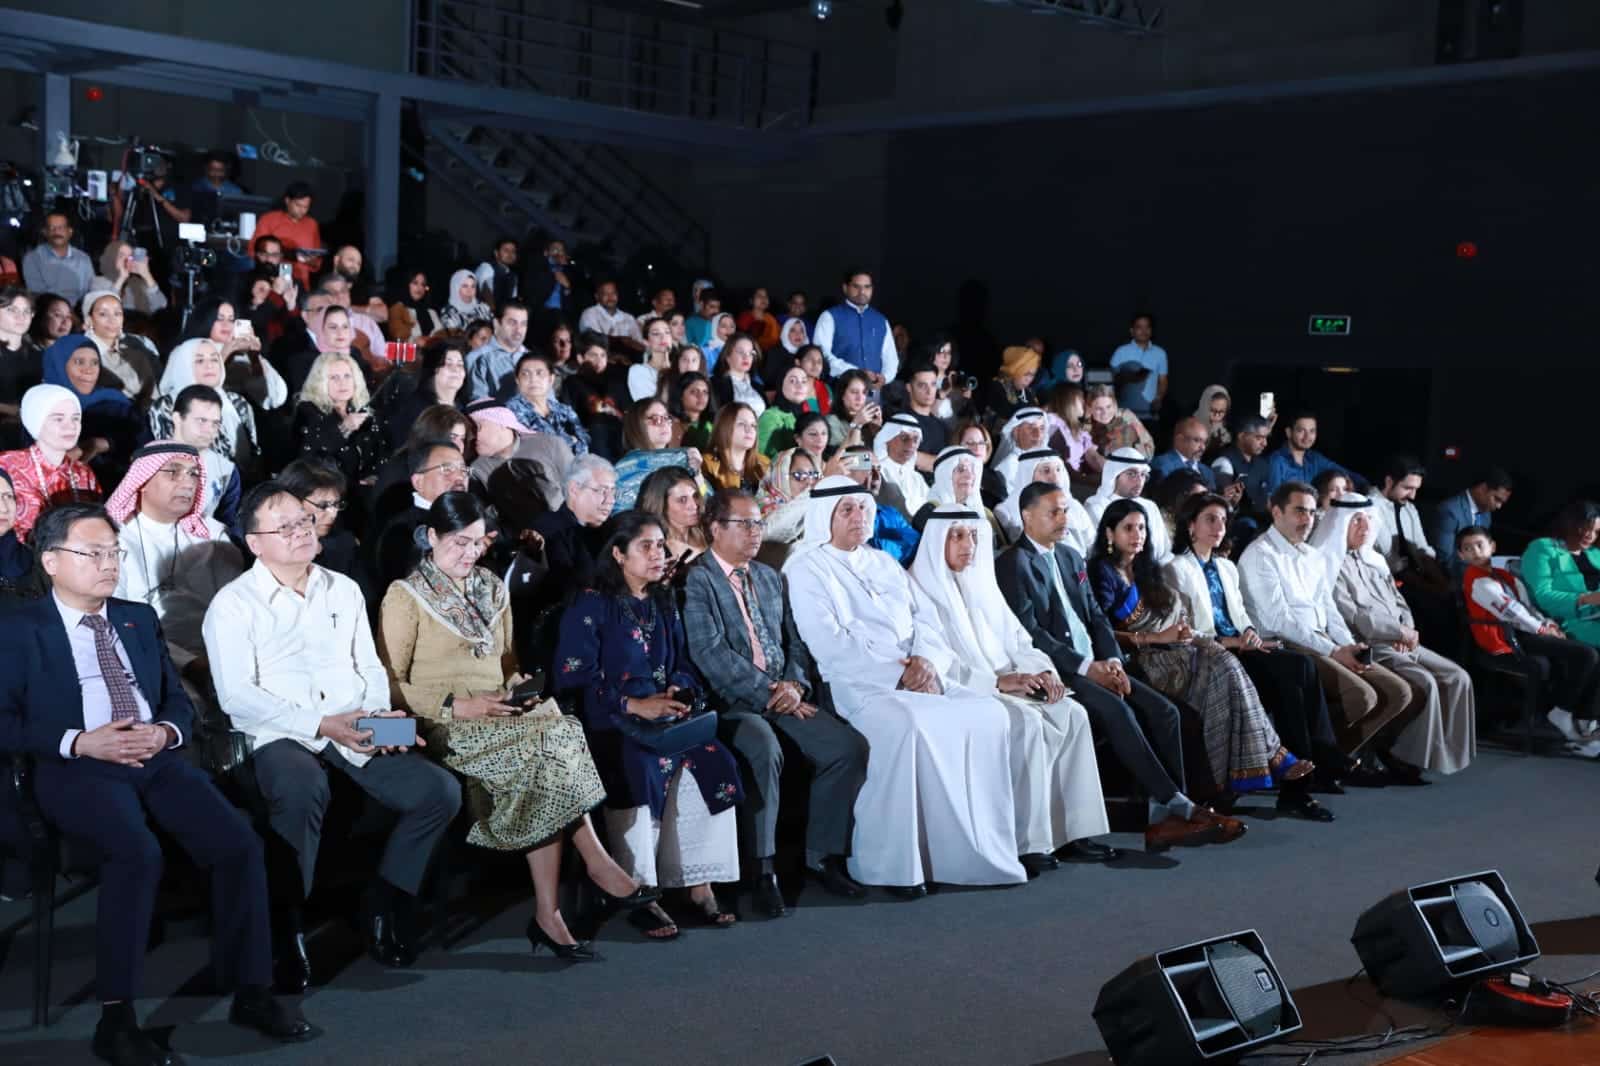 Audience are seen during the event.